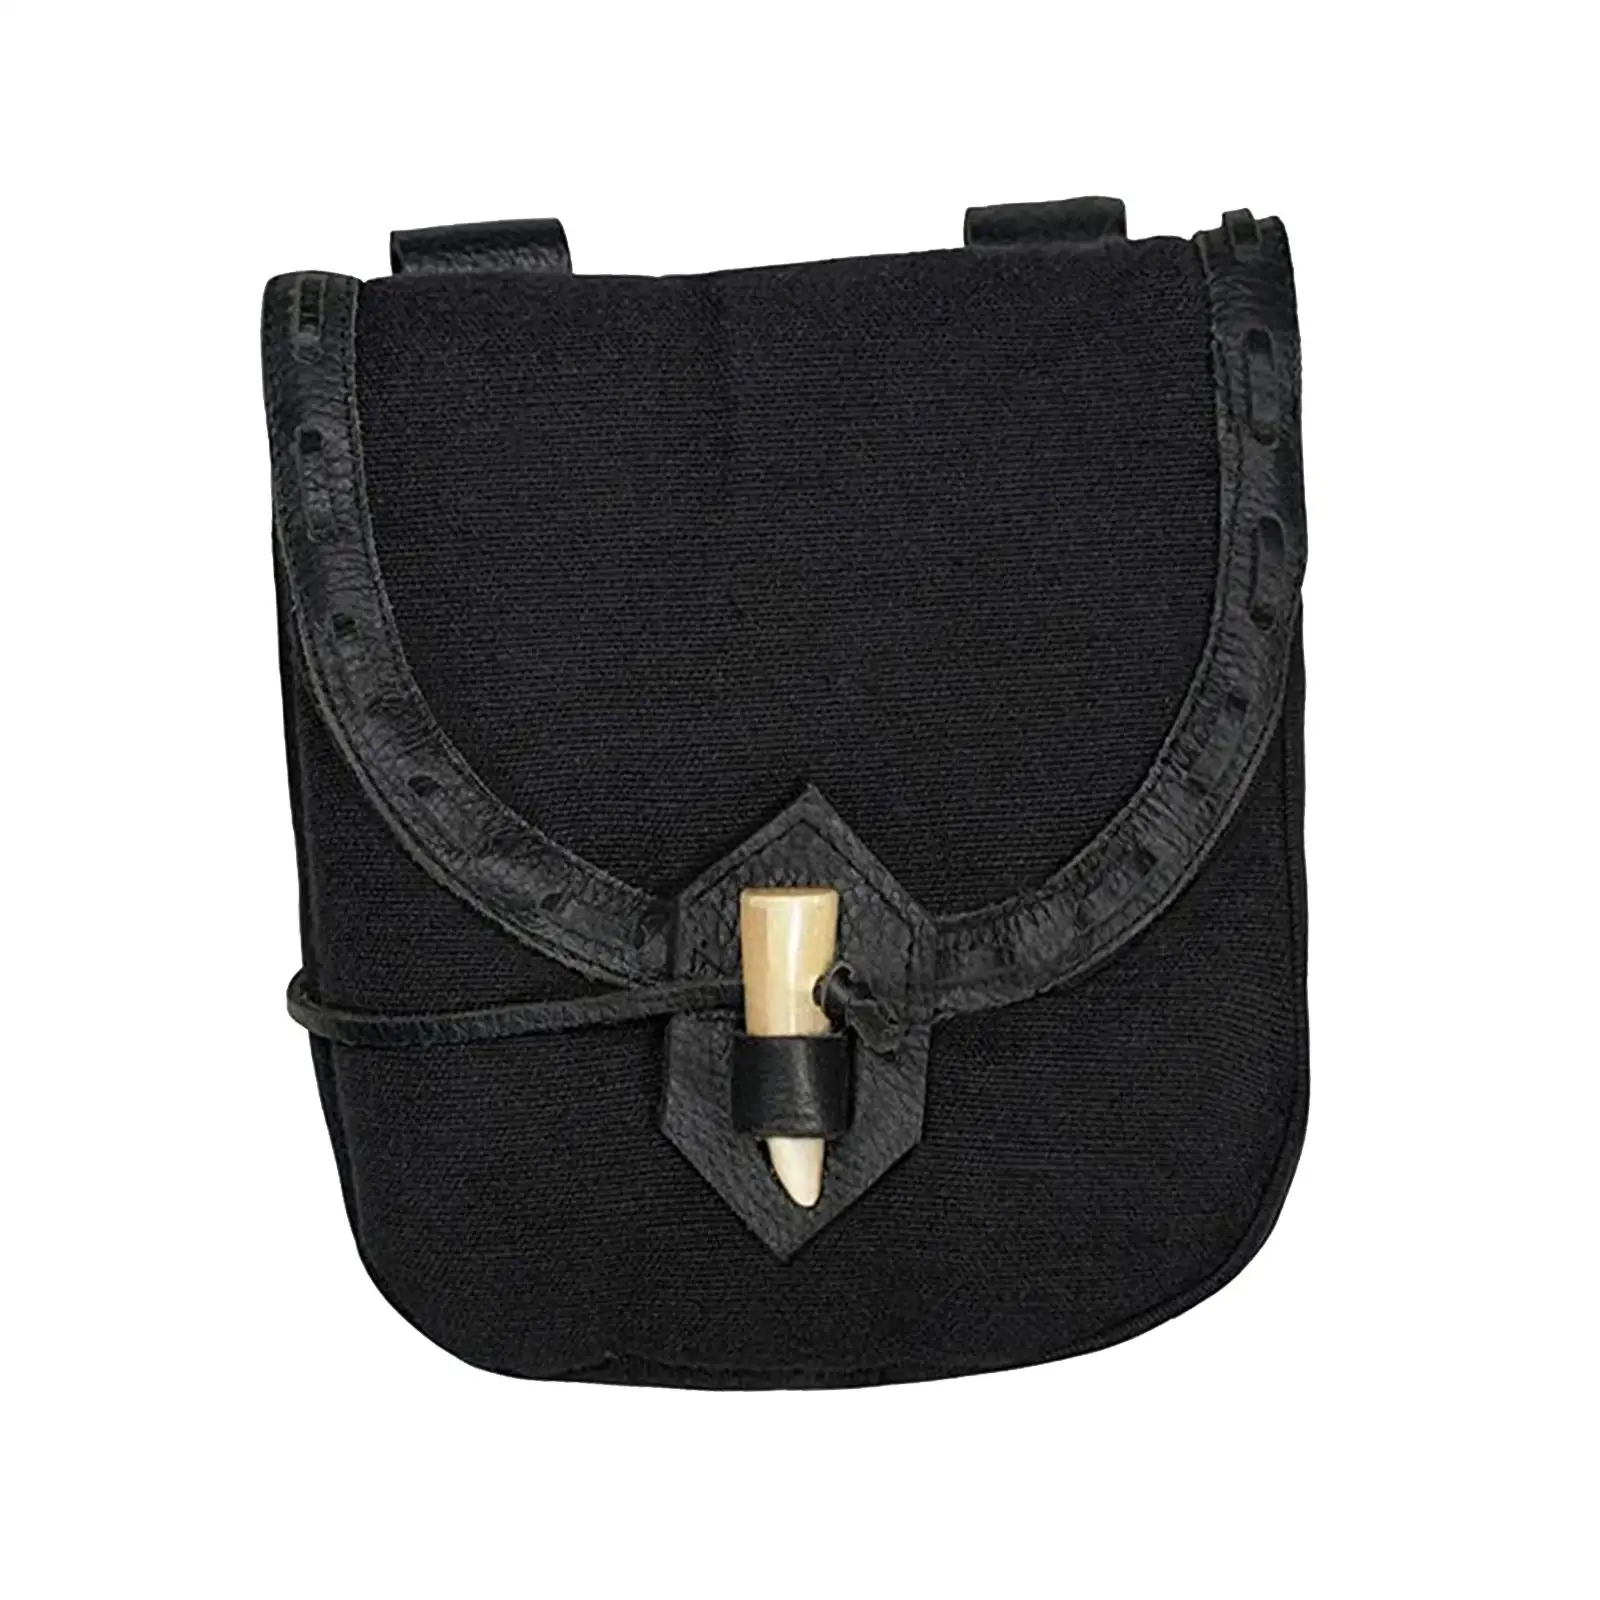 Canvas Medieval Belt Pouch Durable Wear Resistant Big Capacity Cosplay Costume Fanny Pack Waist Bag Costume Accessories